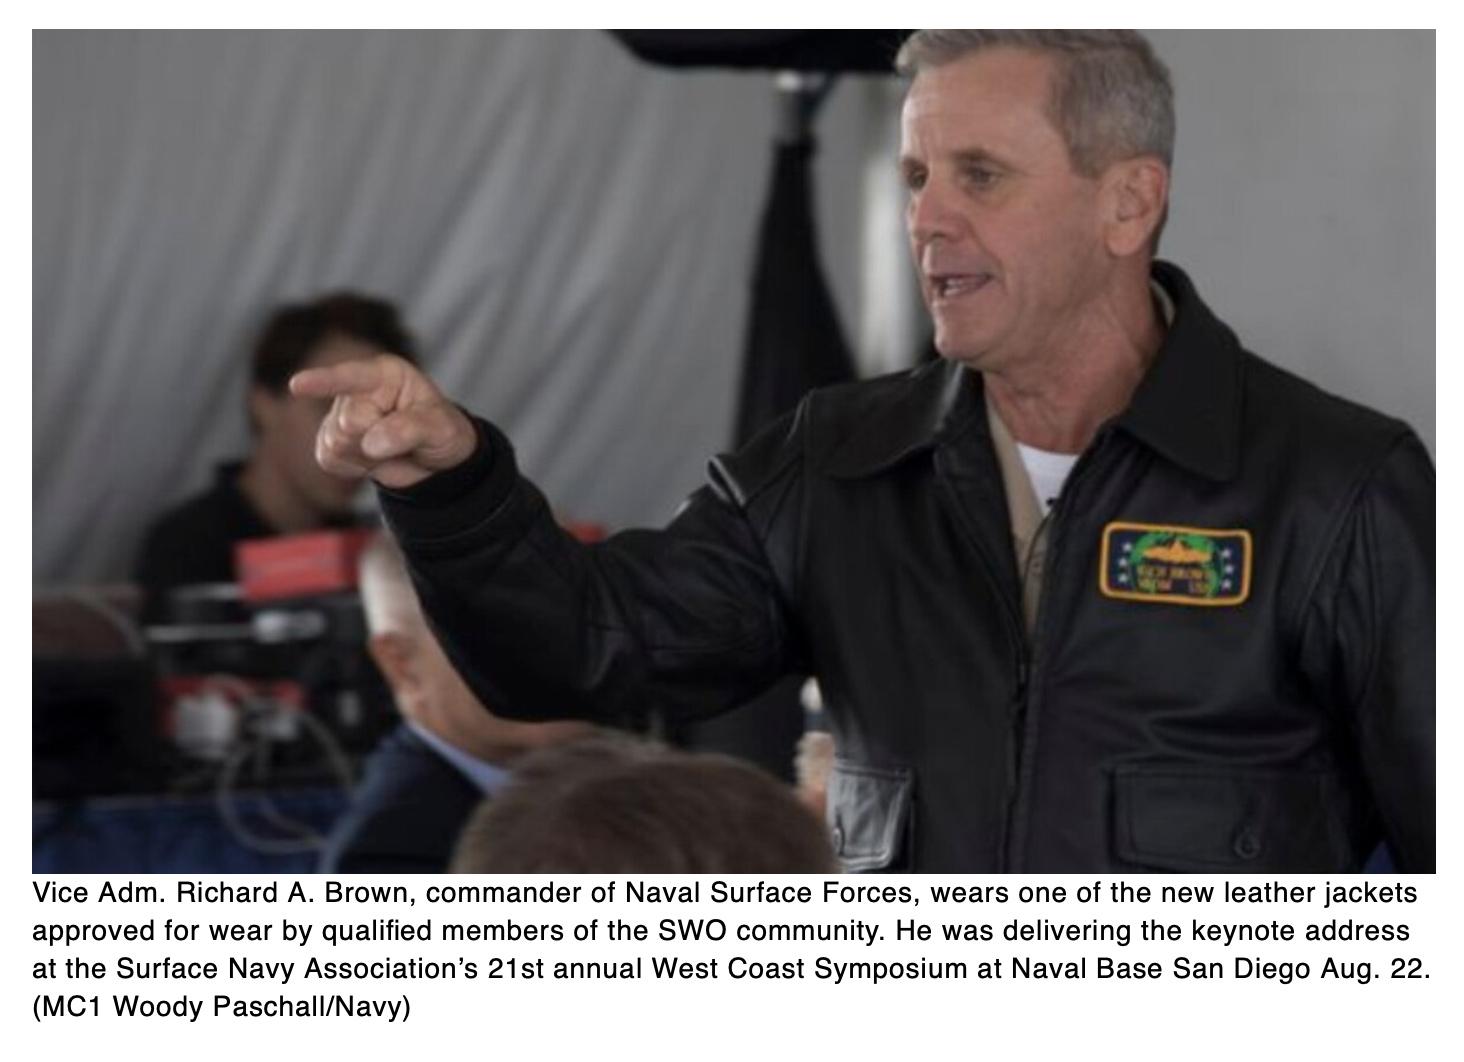  Surface warfare officers: Order your leather jackets now!